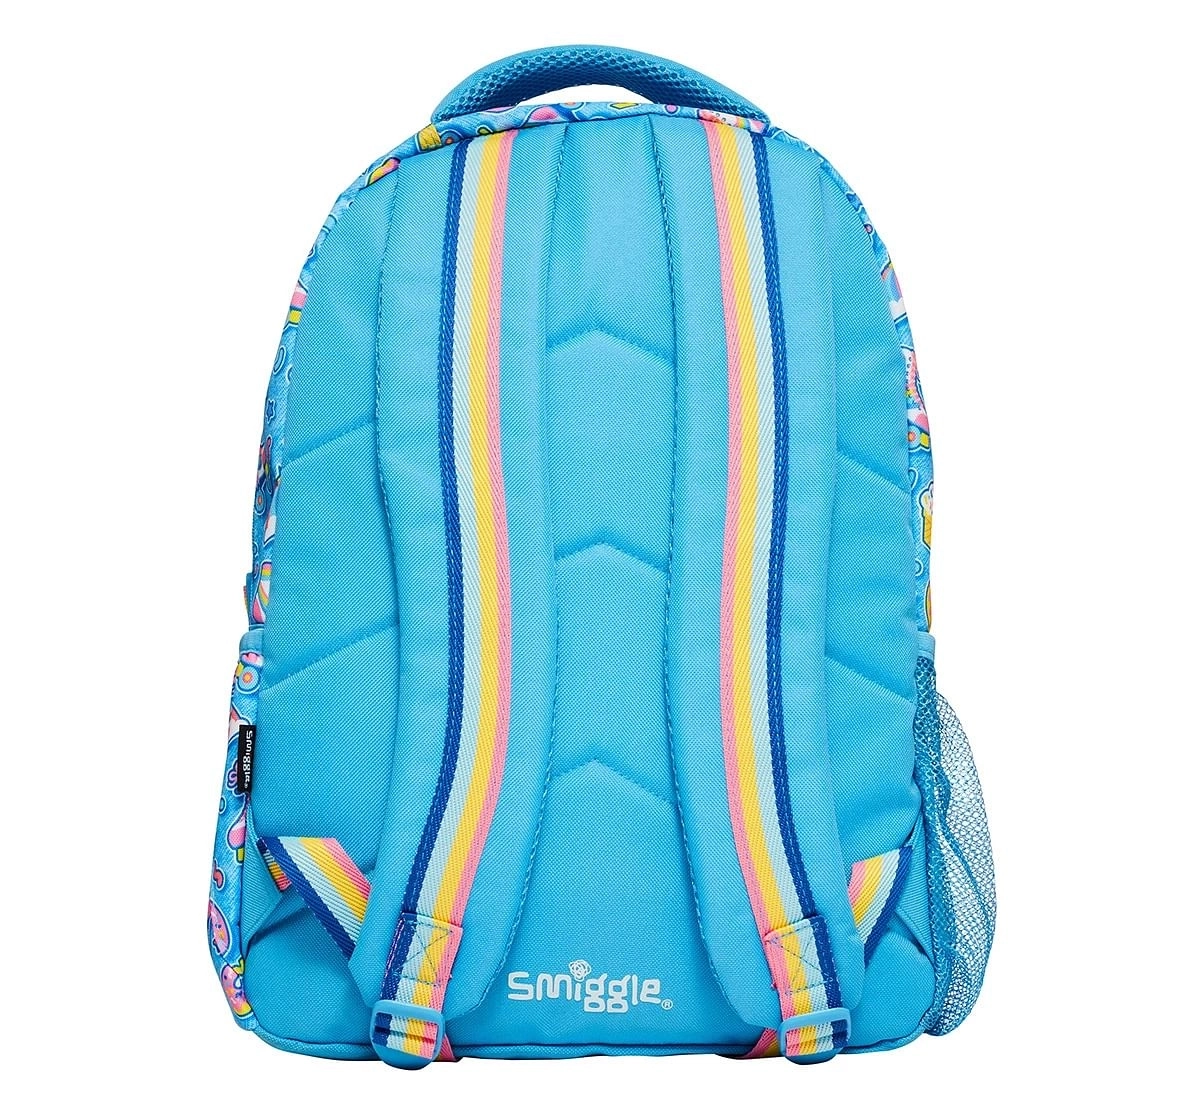 Smiggle Bright Side Classic Attachable Colourful printed bag for Kids 3Y+, Blue and Black